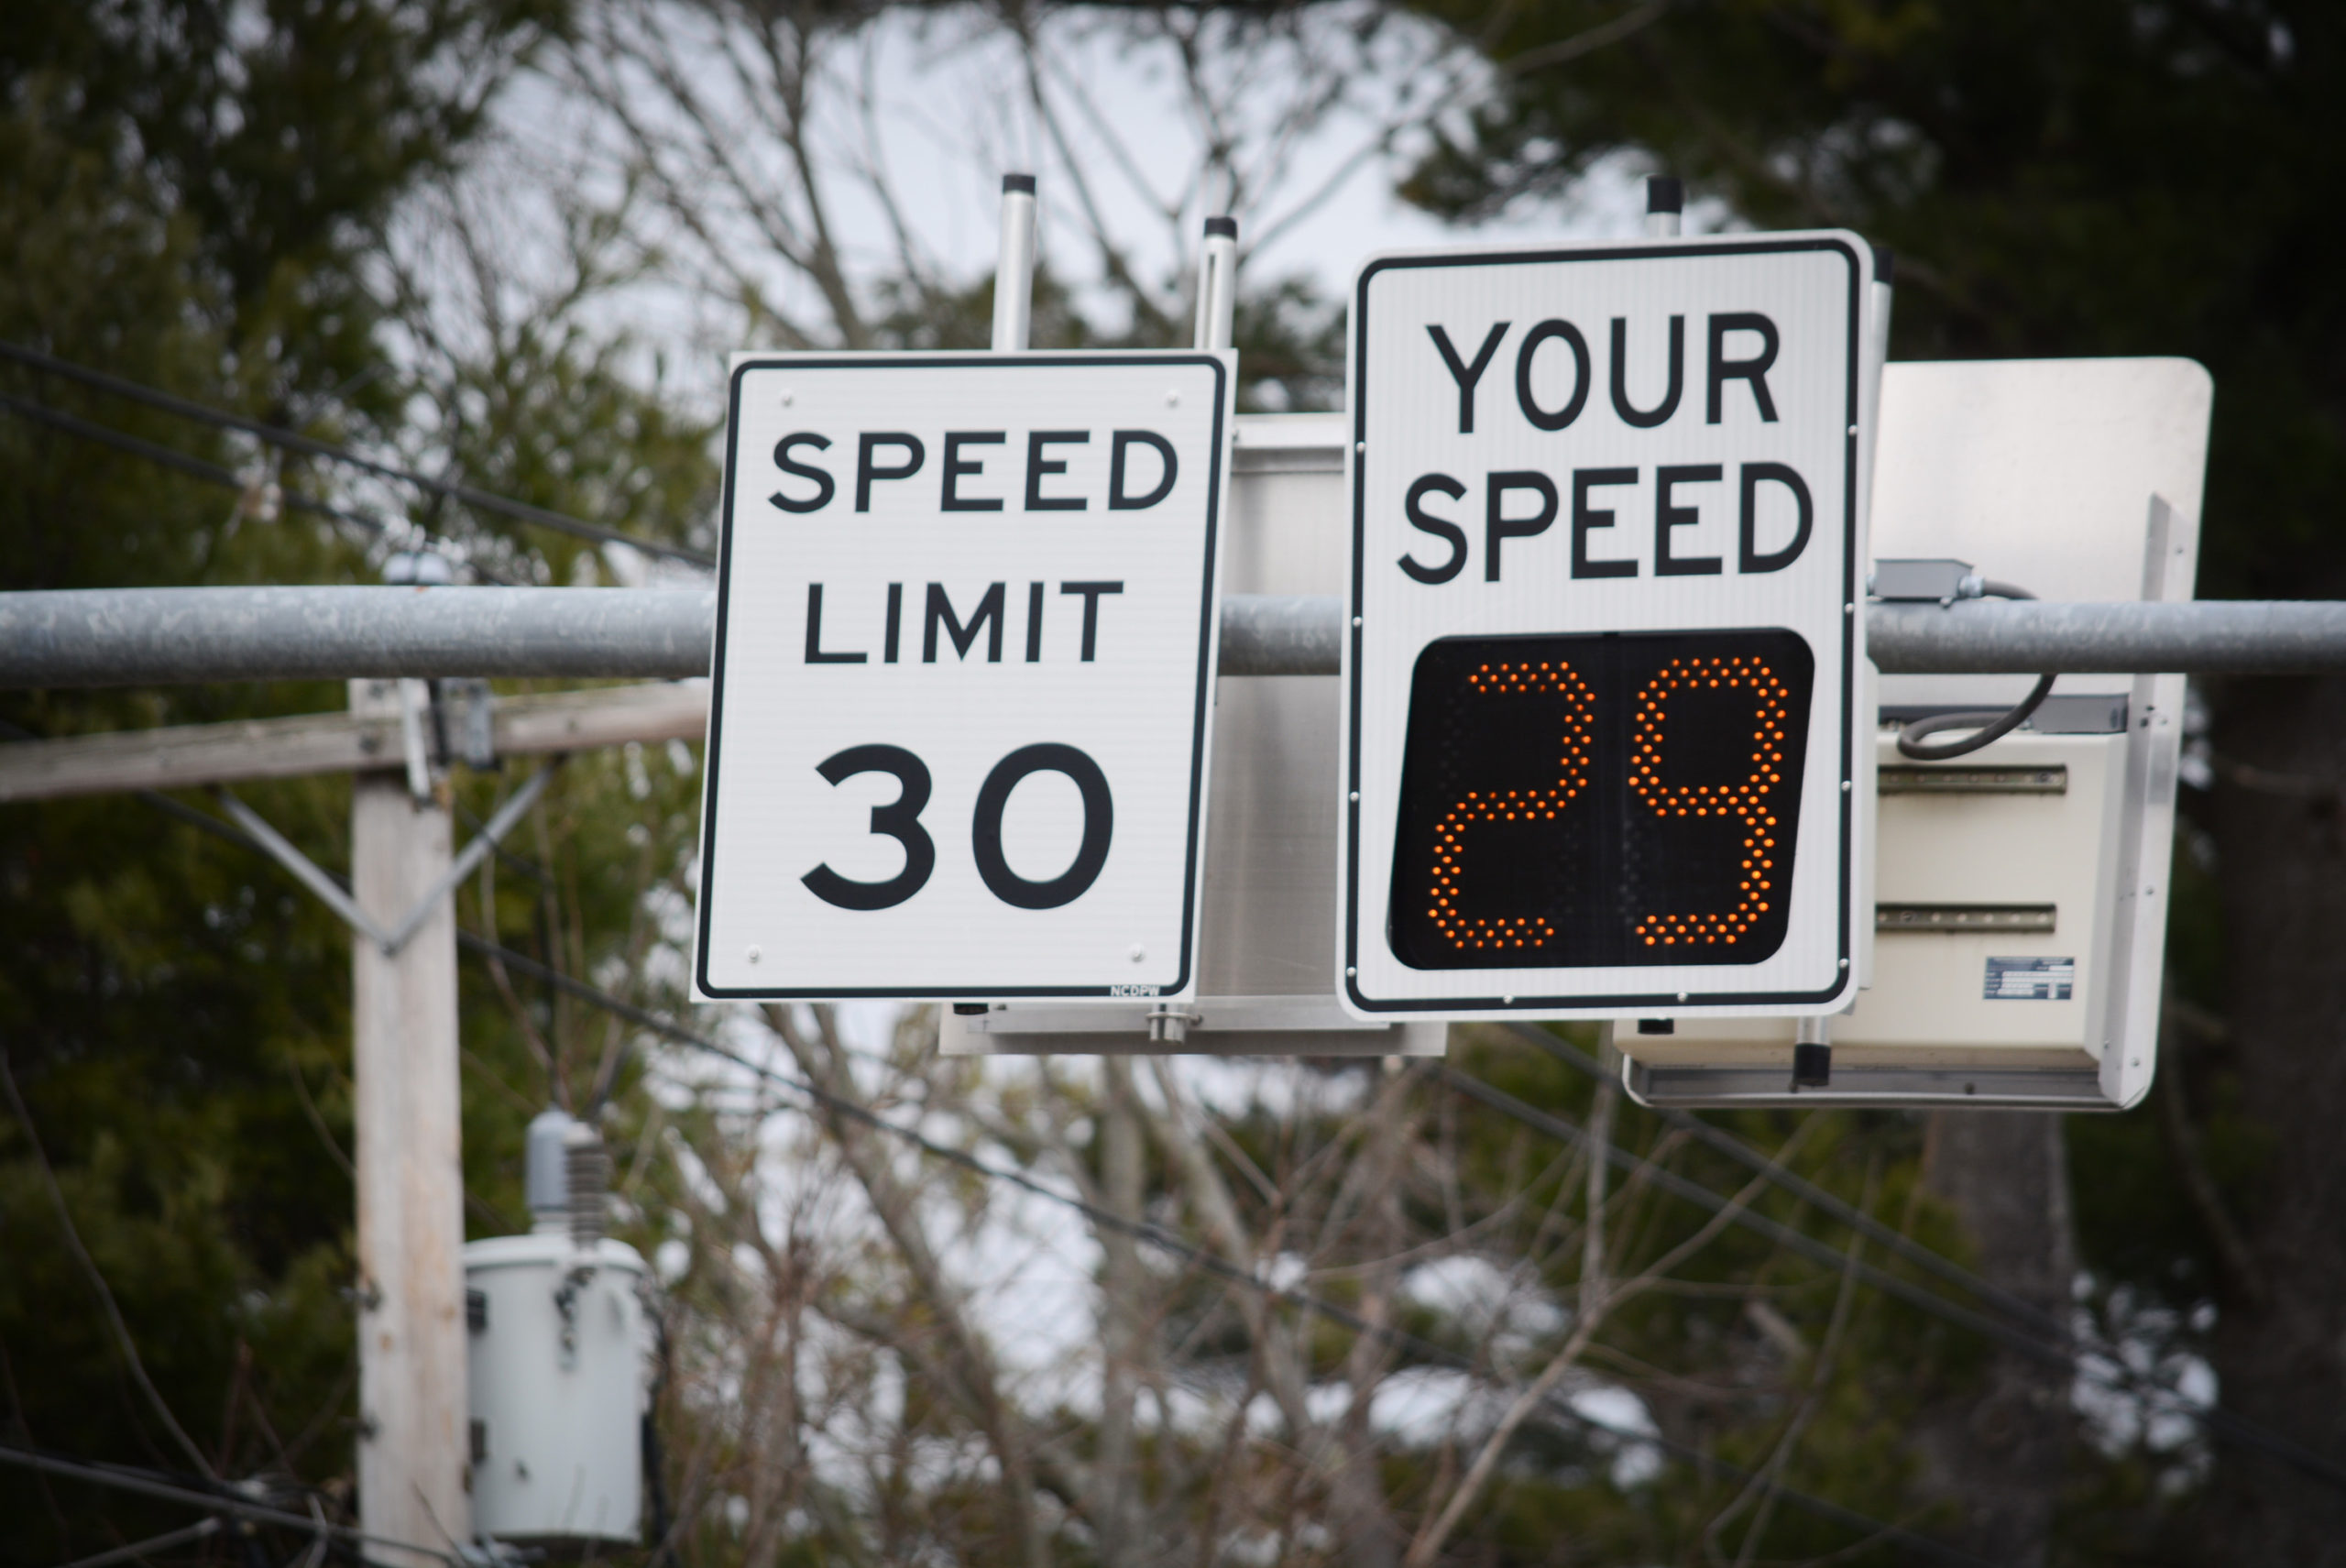 11 villages throughout the North Shore will be getting speed radar signs, like this one seen on Roslyn Road, in hopes of getting people to slow down. (Photo by Janelle Clausen)